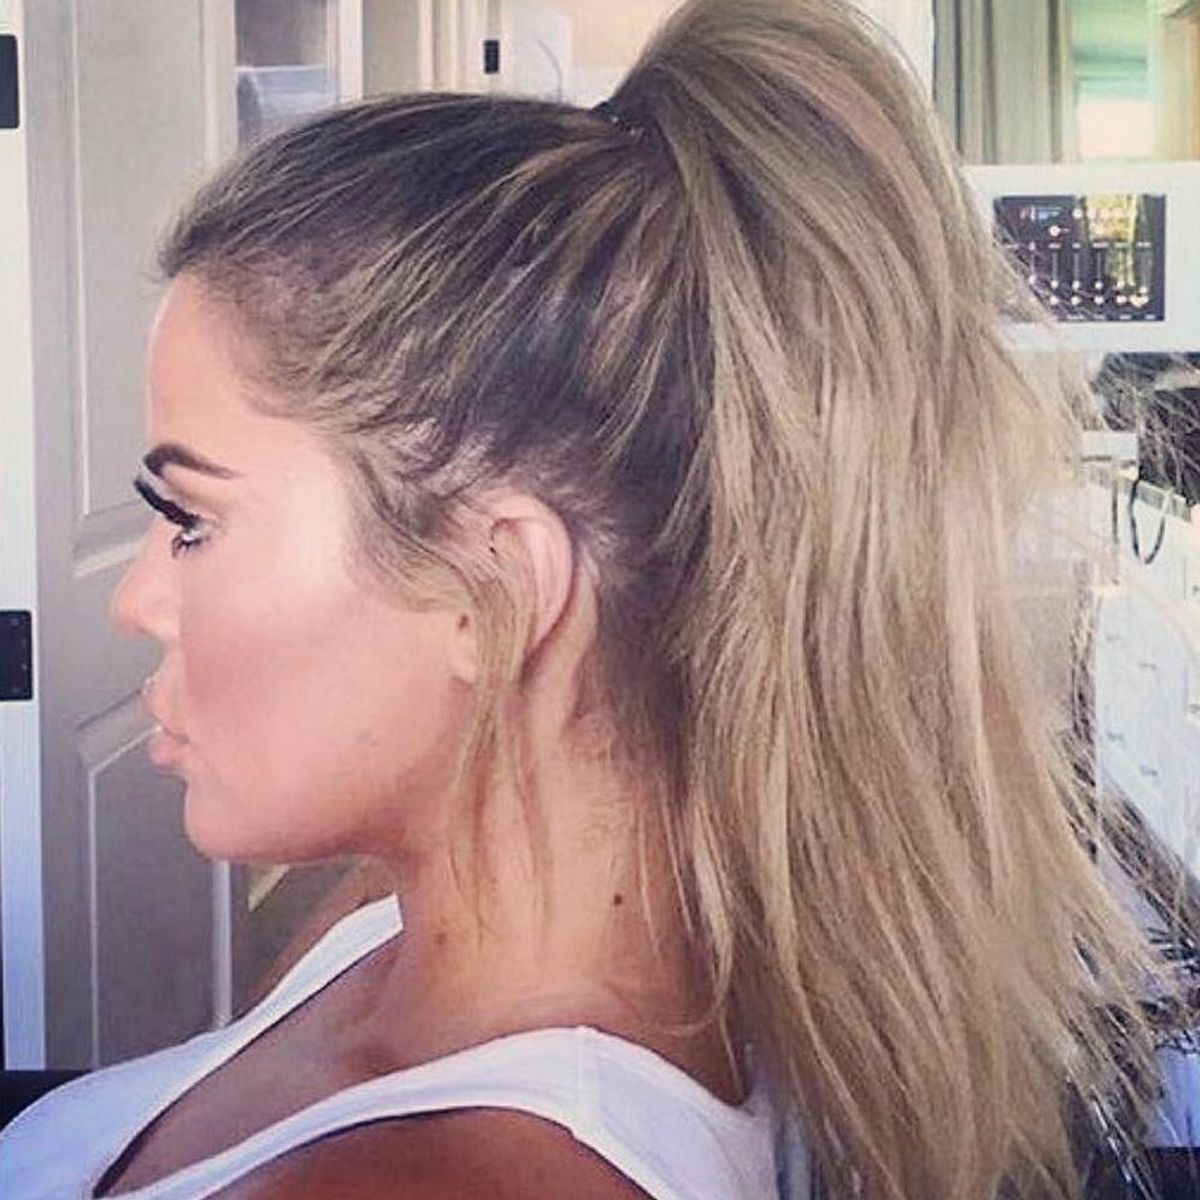 The Hottest Celebrity Hairstyle of the Summer Can be Done in 5 Minutes Flat